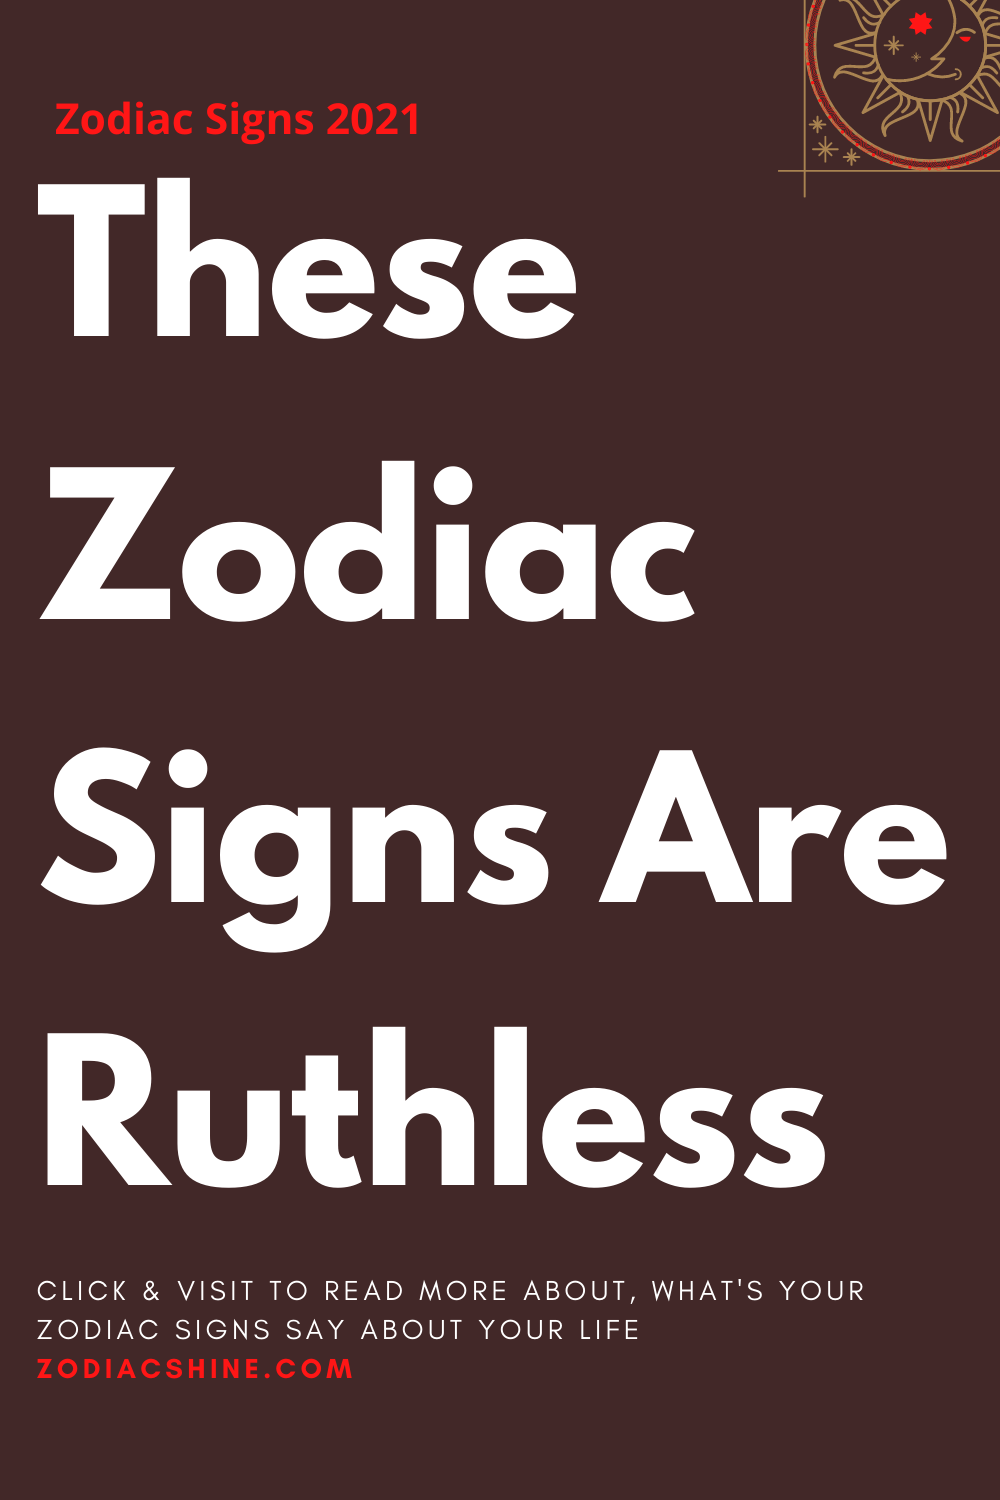 These Zodiac Signs Are Ruthless